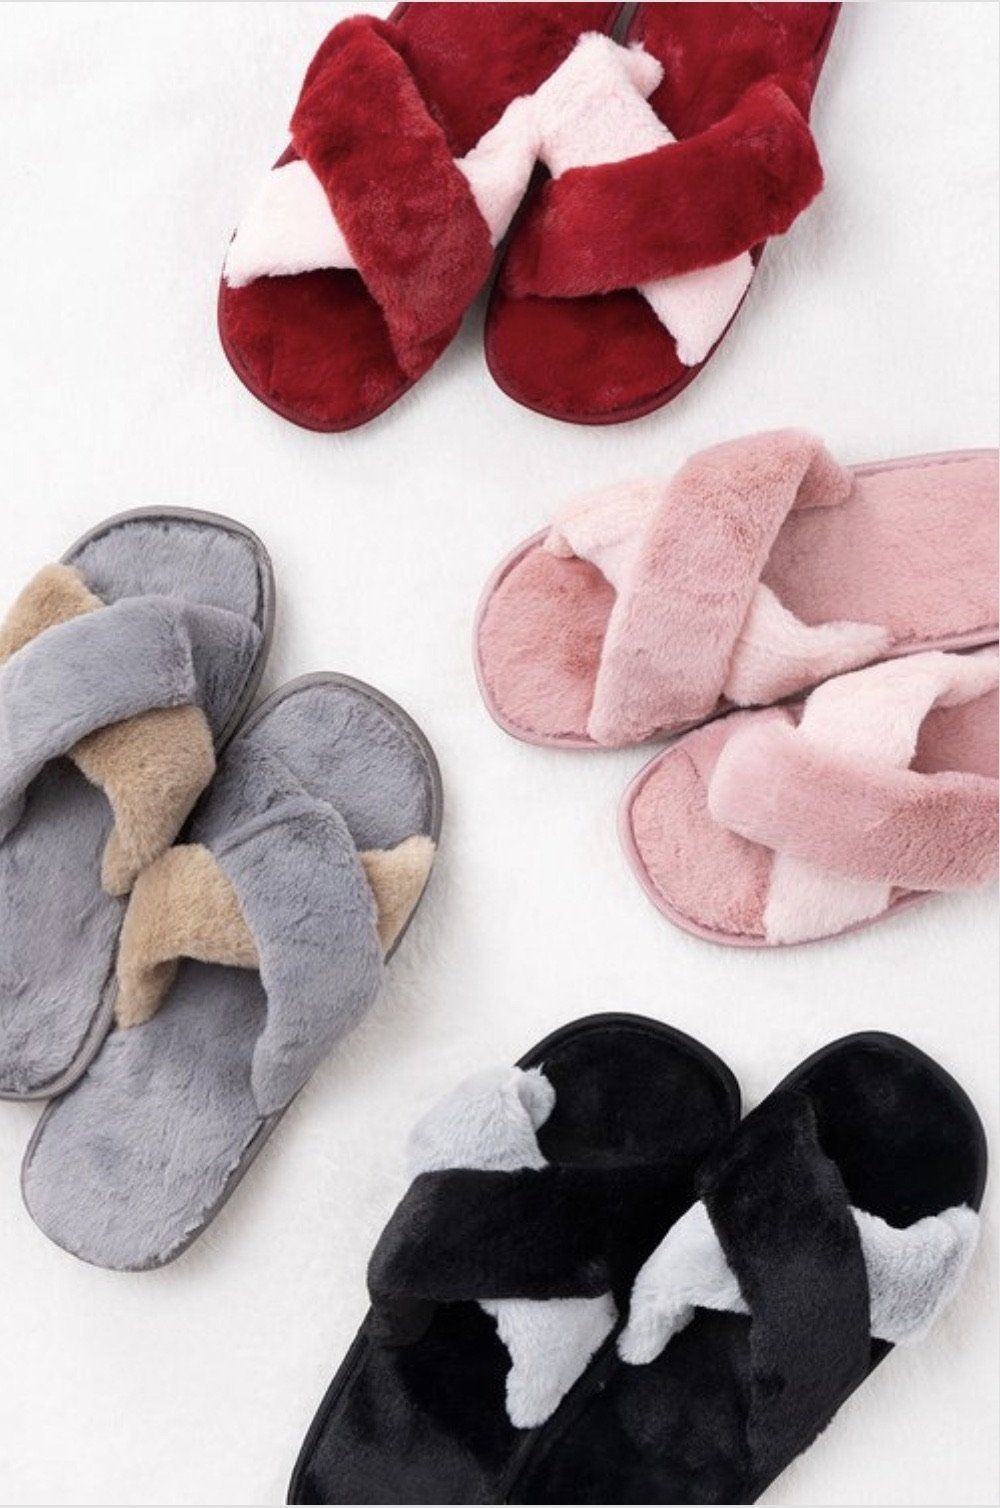 Slippers That'll Keep You Warm 